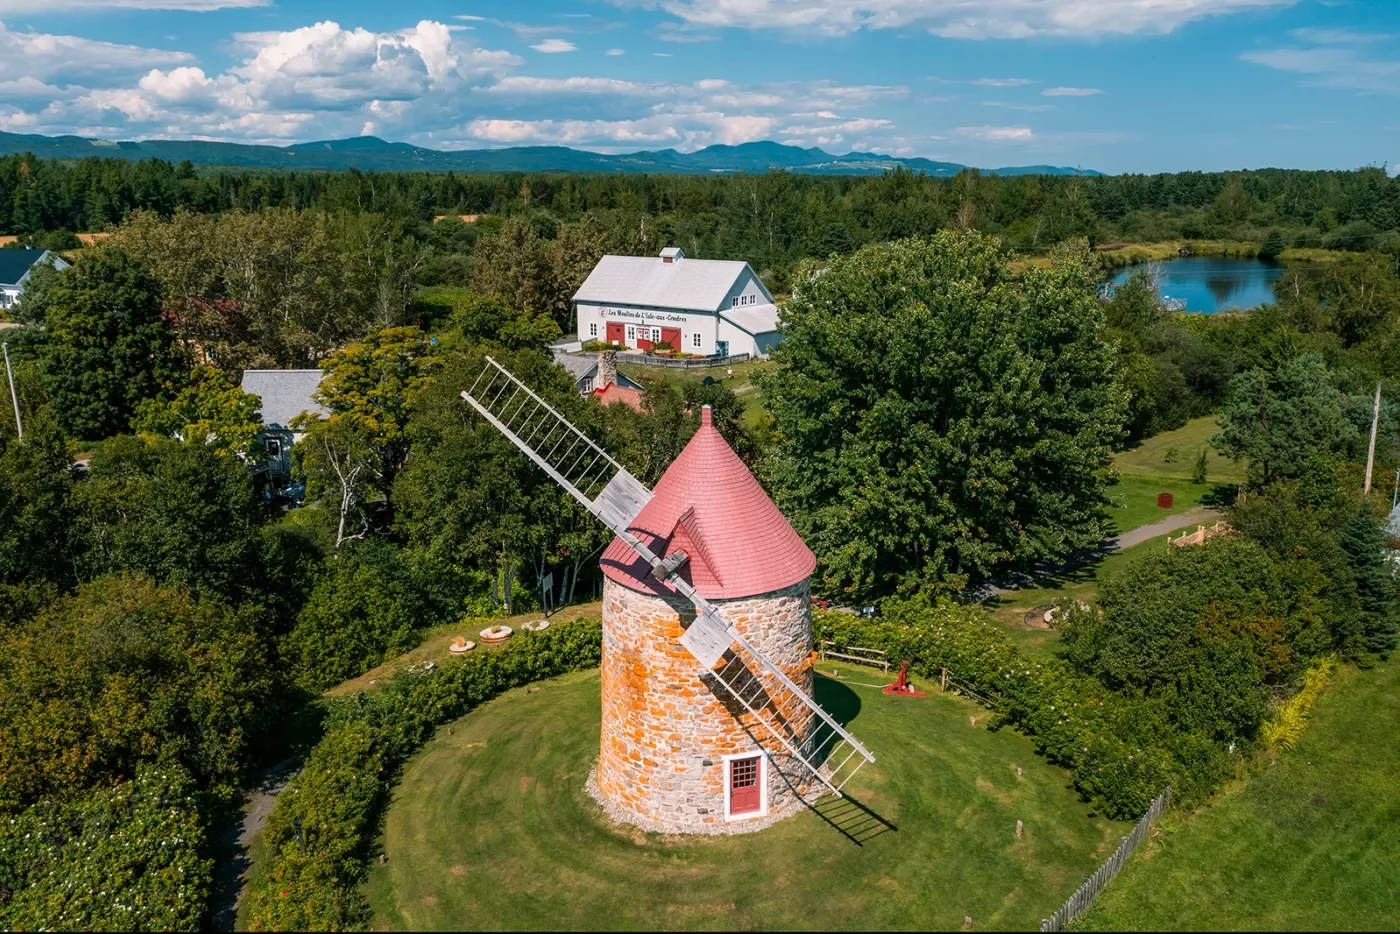 Aerial shot of a windmill surrounded by grass and trees